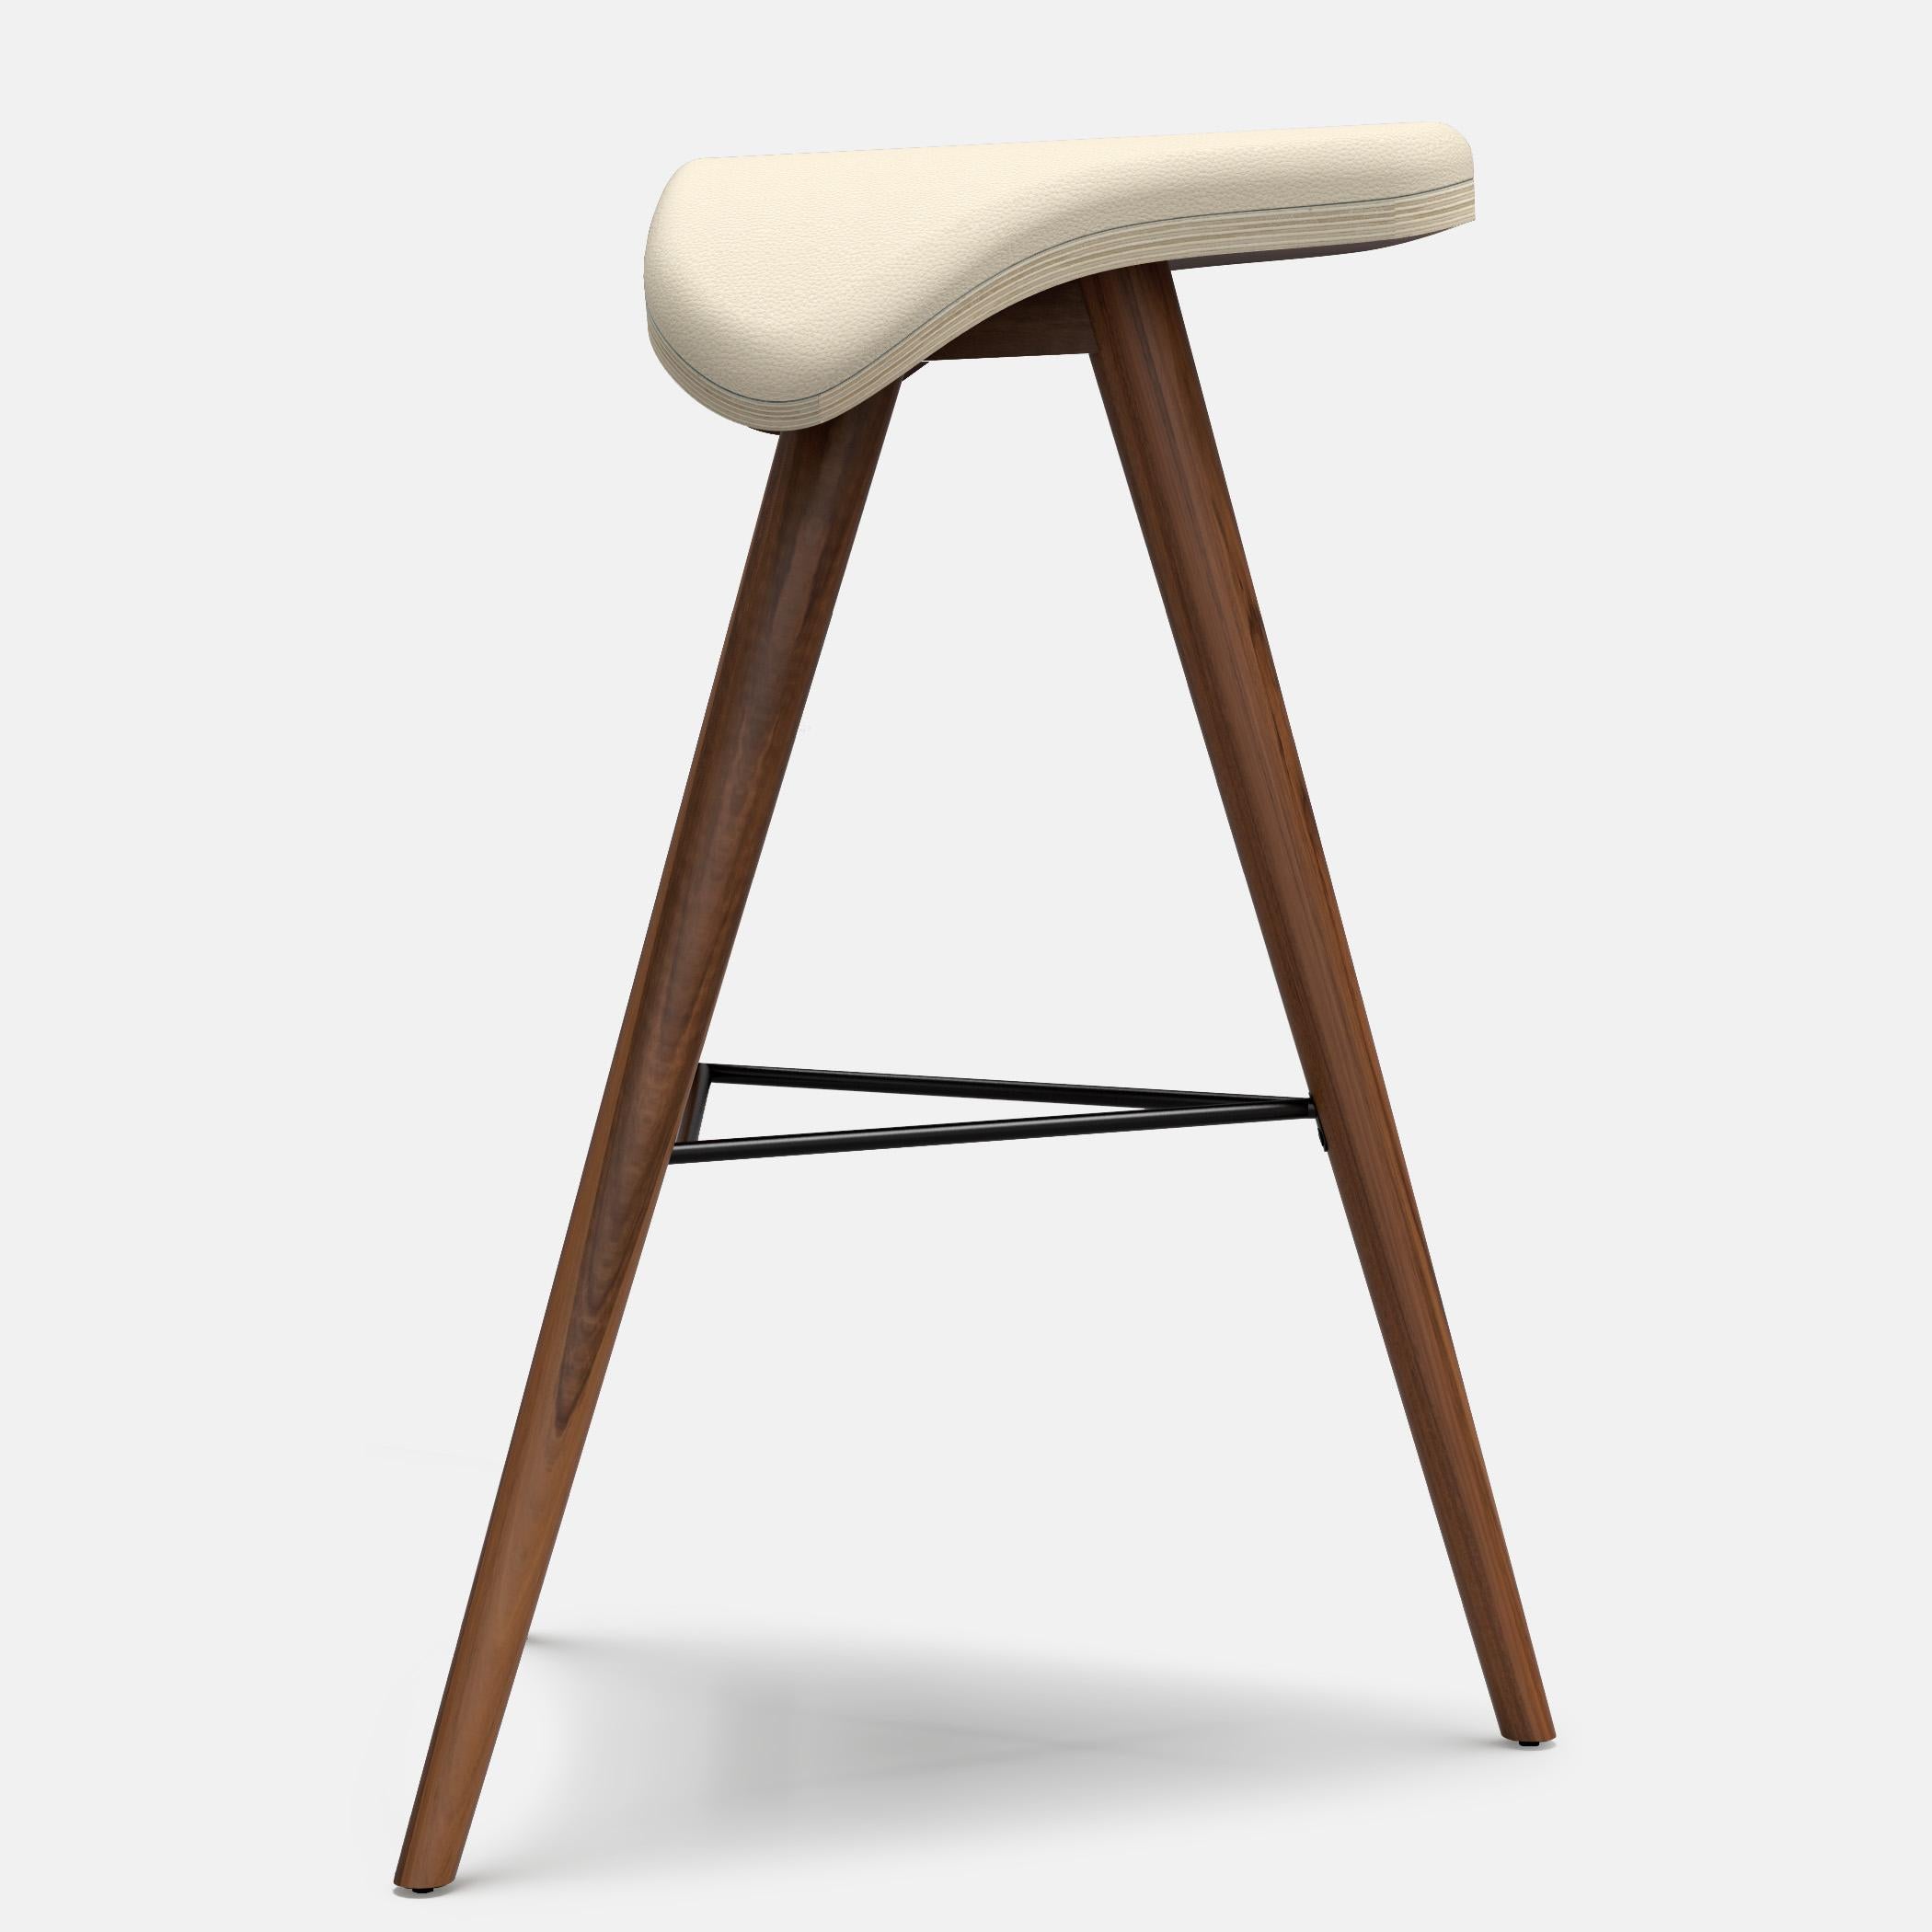 Walnut and fabric horse high stool by Alexandre Caldas
Dimensions: W 50 x D 55 x H 79 cm
Materials: Walnut, fabric

Structure also available in beech, ash, oak, mix wood
Seat also available in fabric, leather, corkfabric.
  